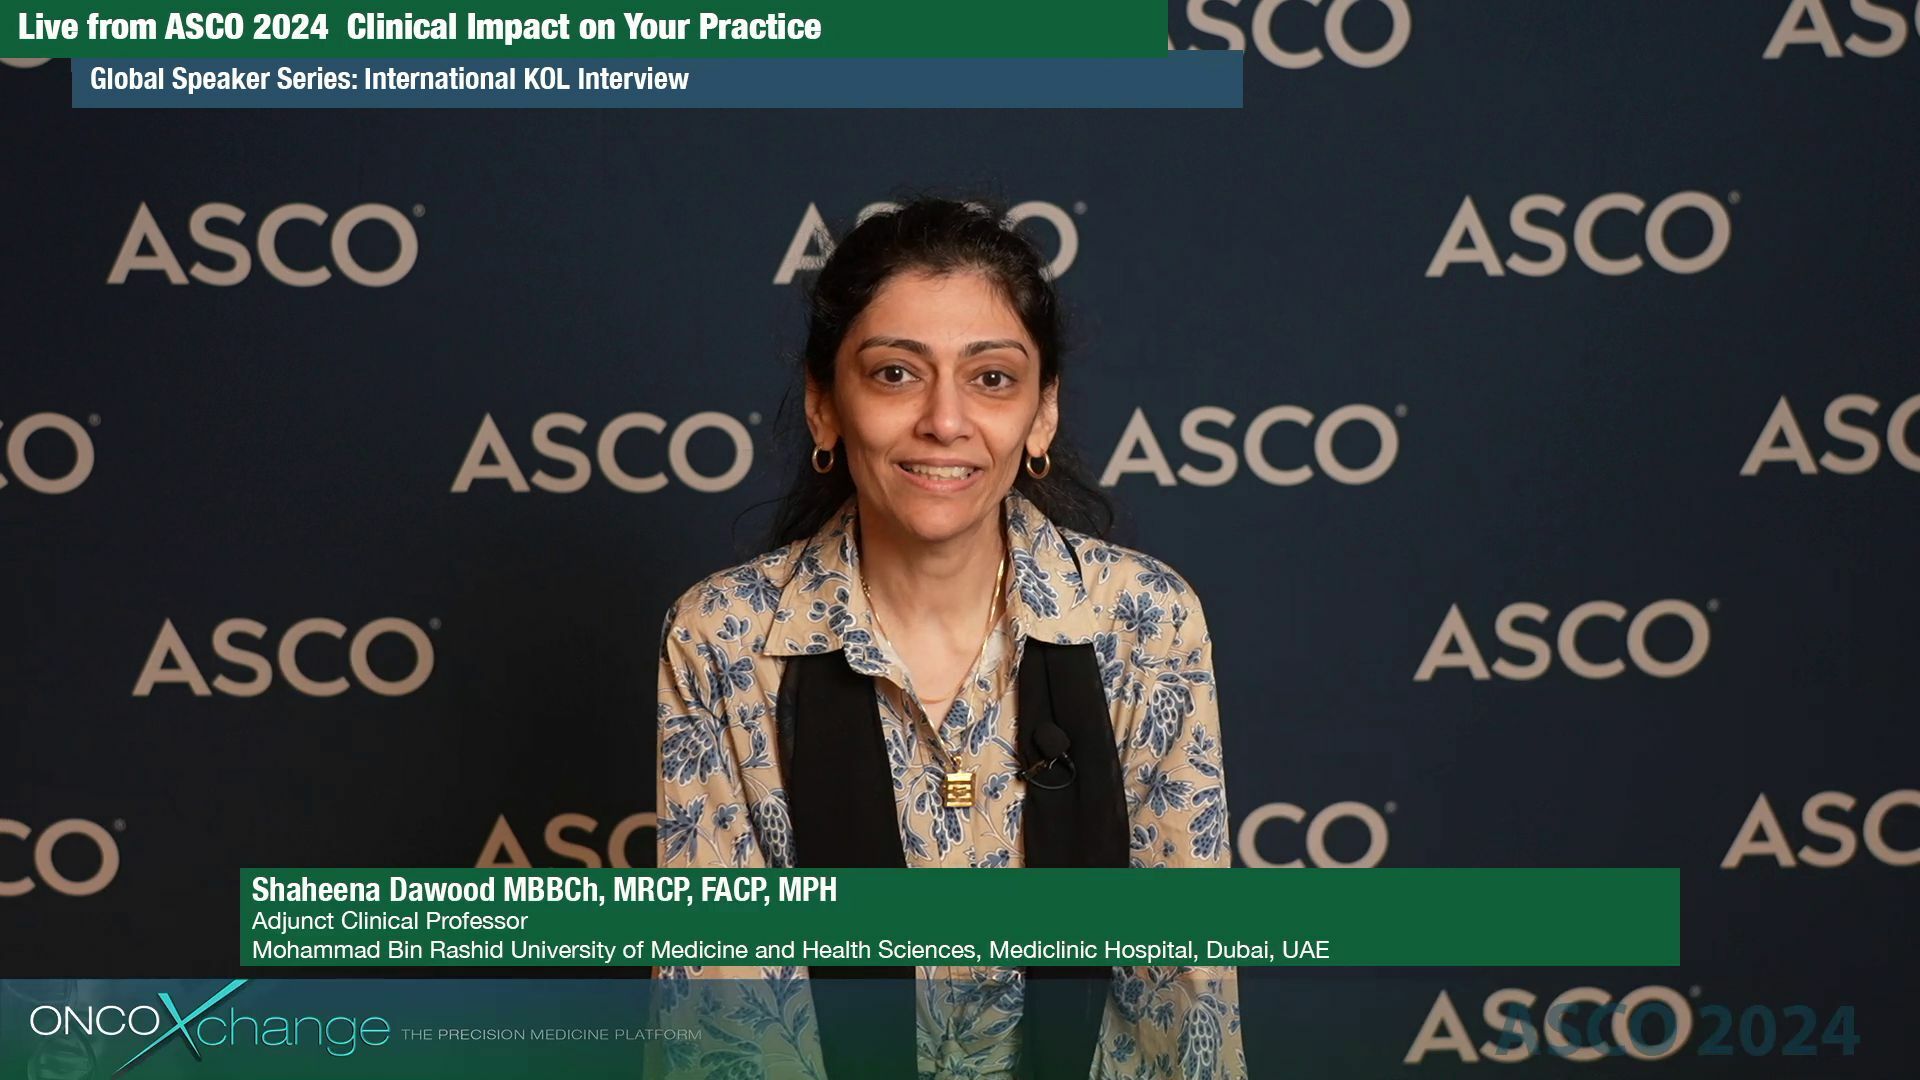 ASCO 2024 - Global Speaker Series - Advancements in Breast Cancer Research: Insights from Dr. Shaheena Dawood